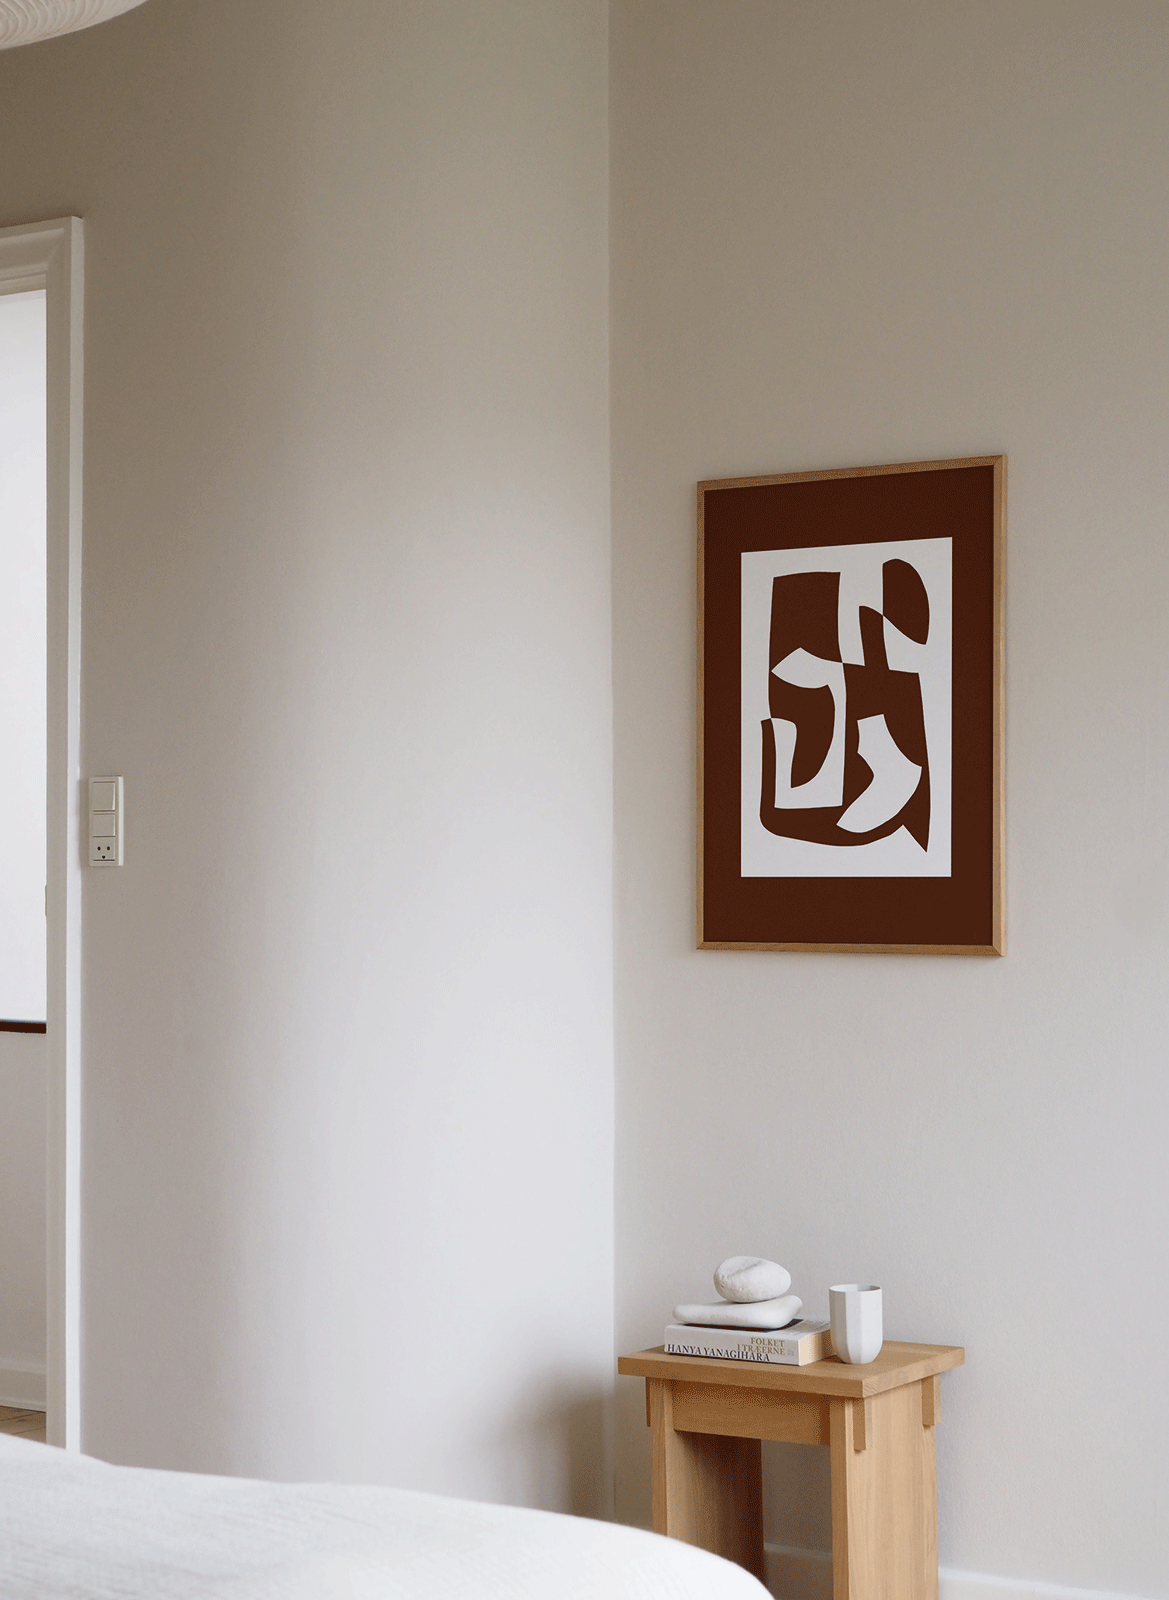 Framed minimalistic poster hanging in a bedroom by Atelier Cph